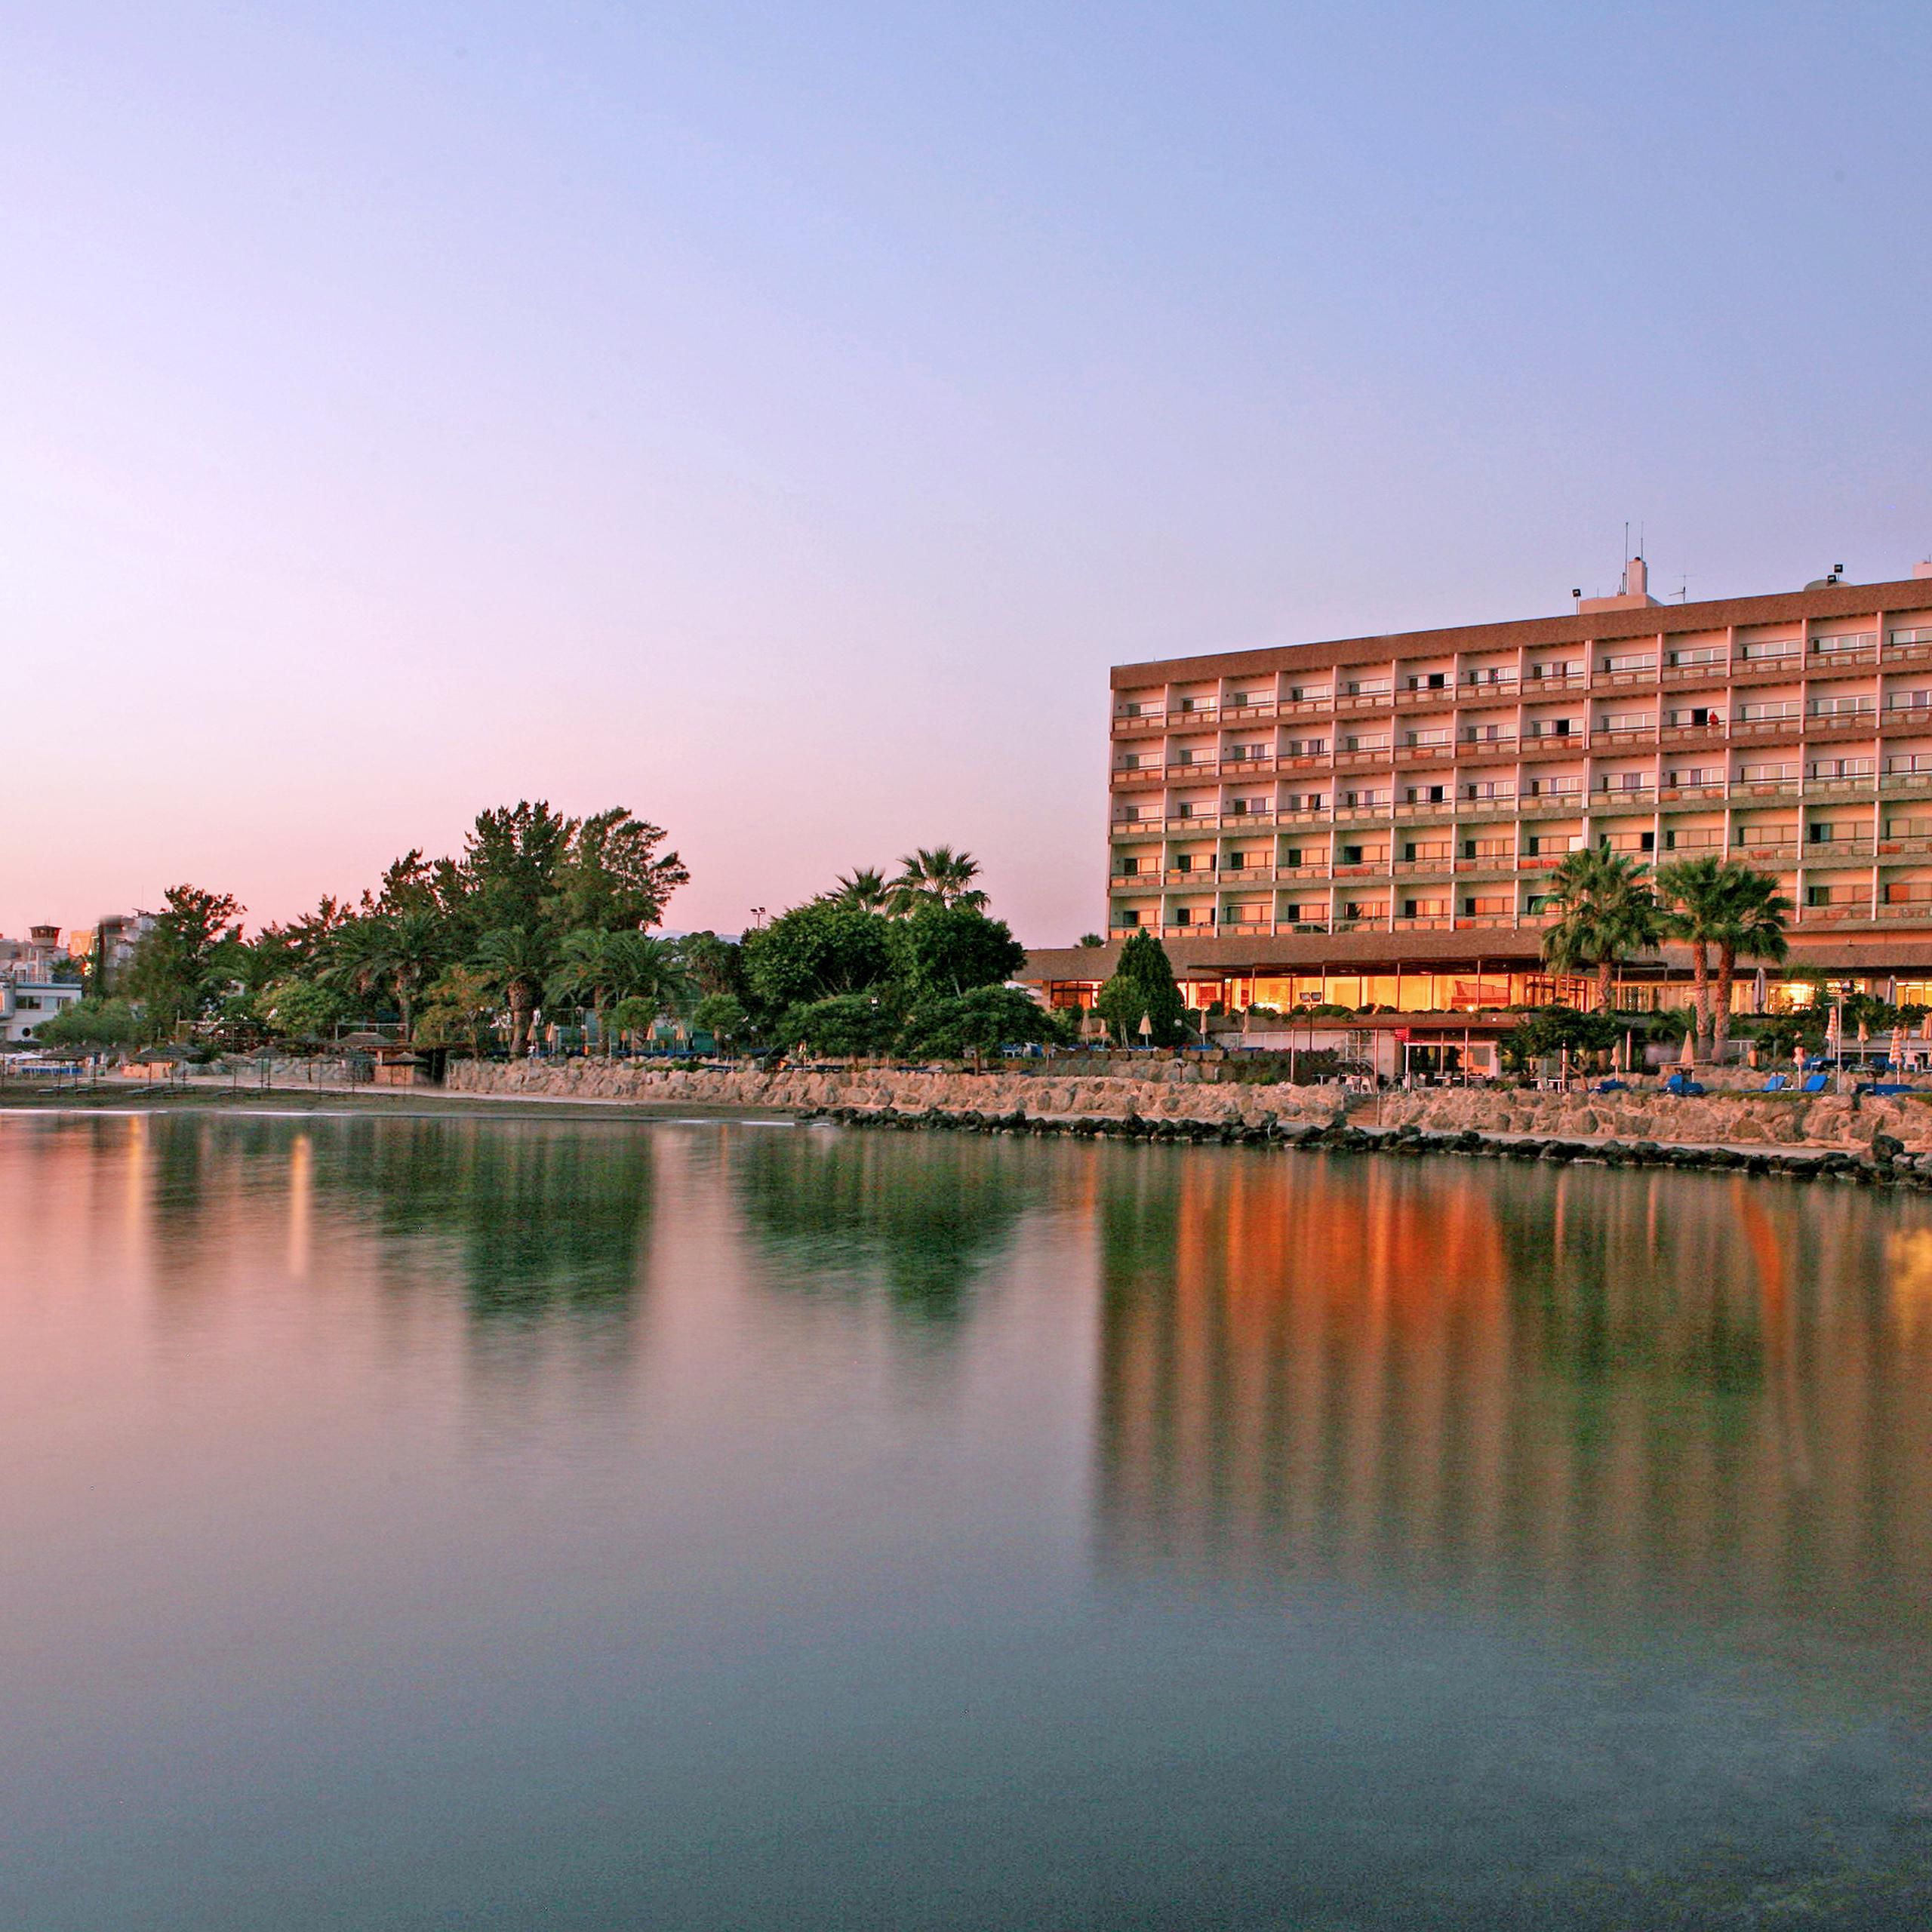 Crowne Plaza Limassol, a business hotel on the beach!